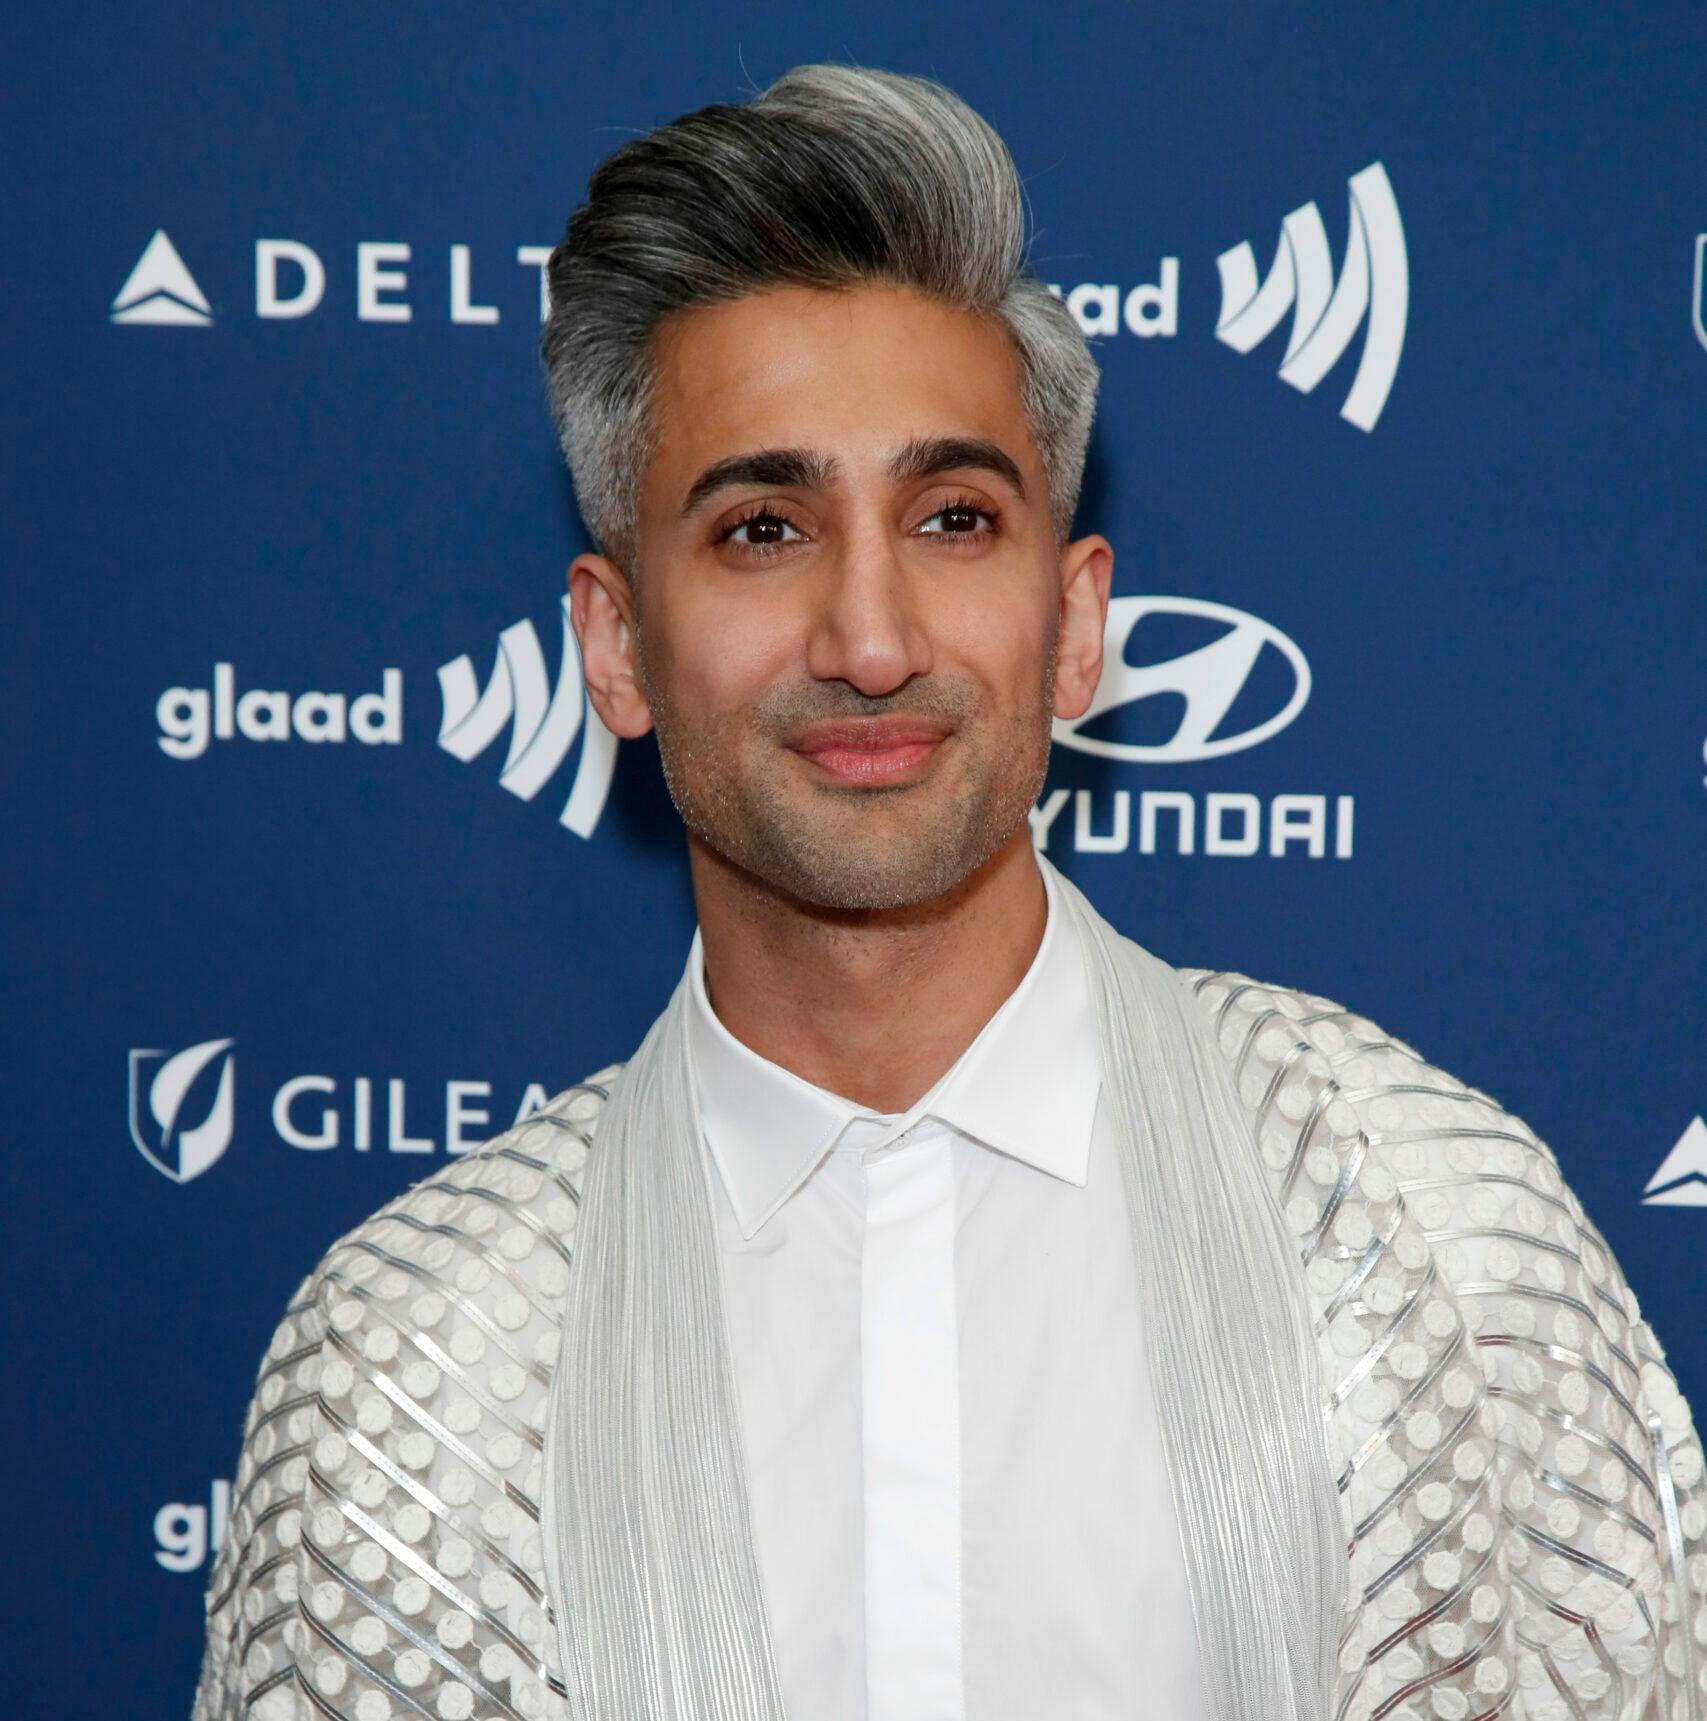 LOS ANGELES - MAR 28: Tan France at the 30th Annual GLAAD Media Awards at the Beverly Hilton Hotel on March 28, 2019 in Los Angeles, CA